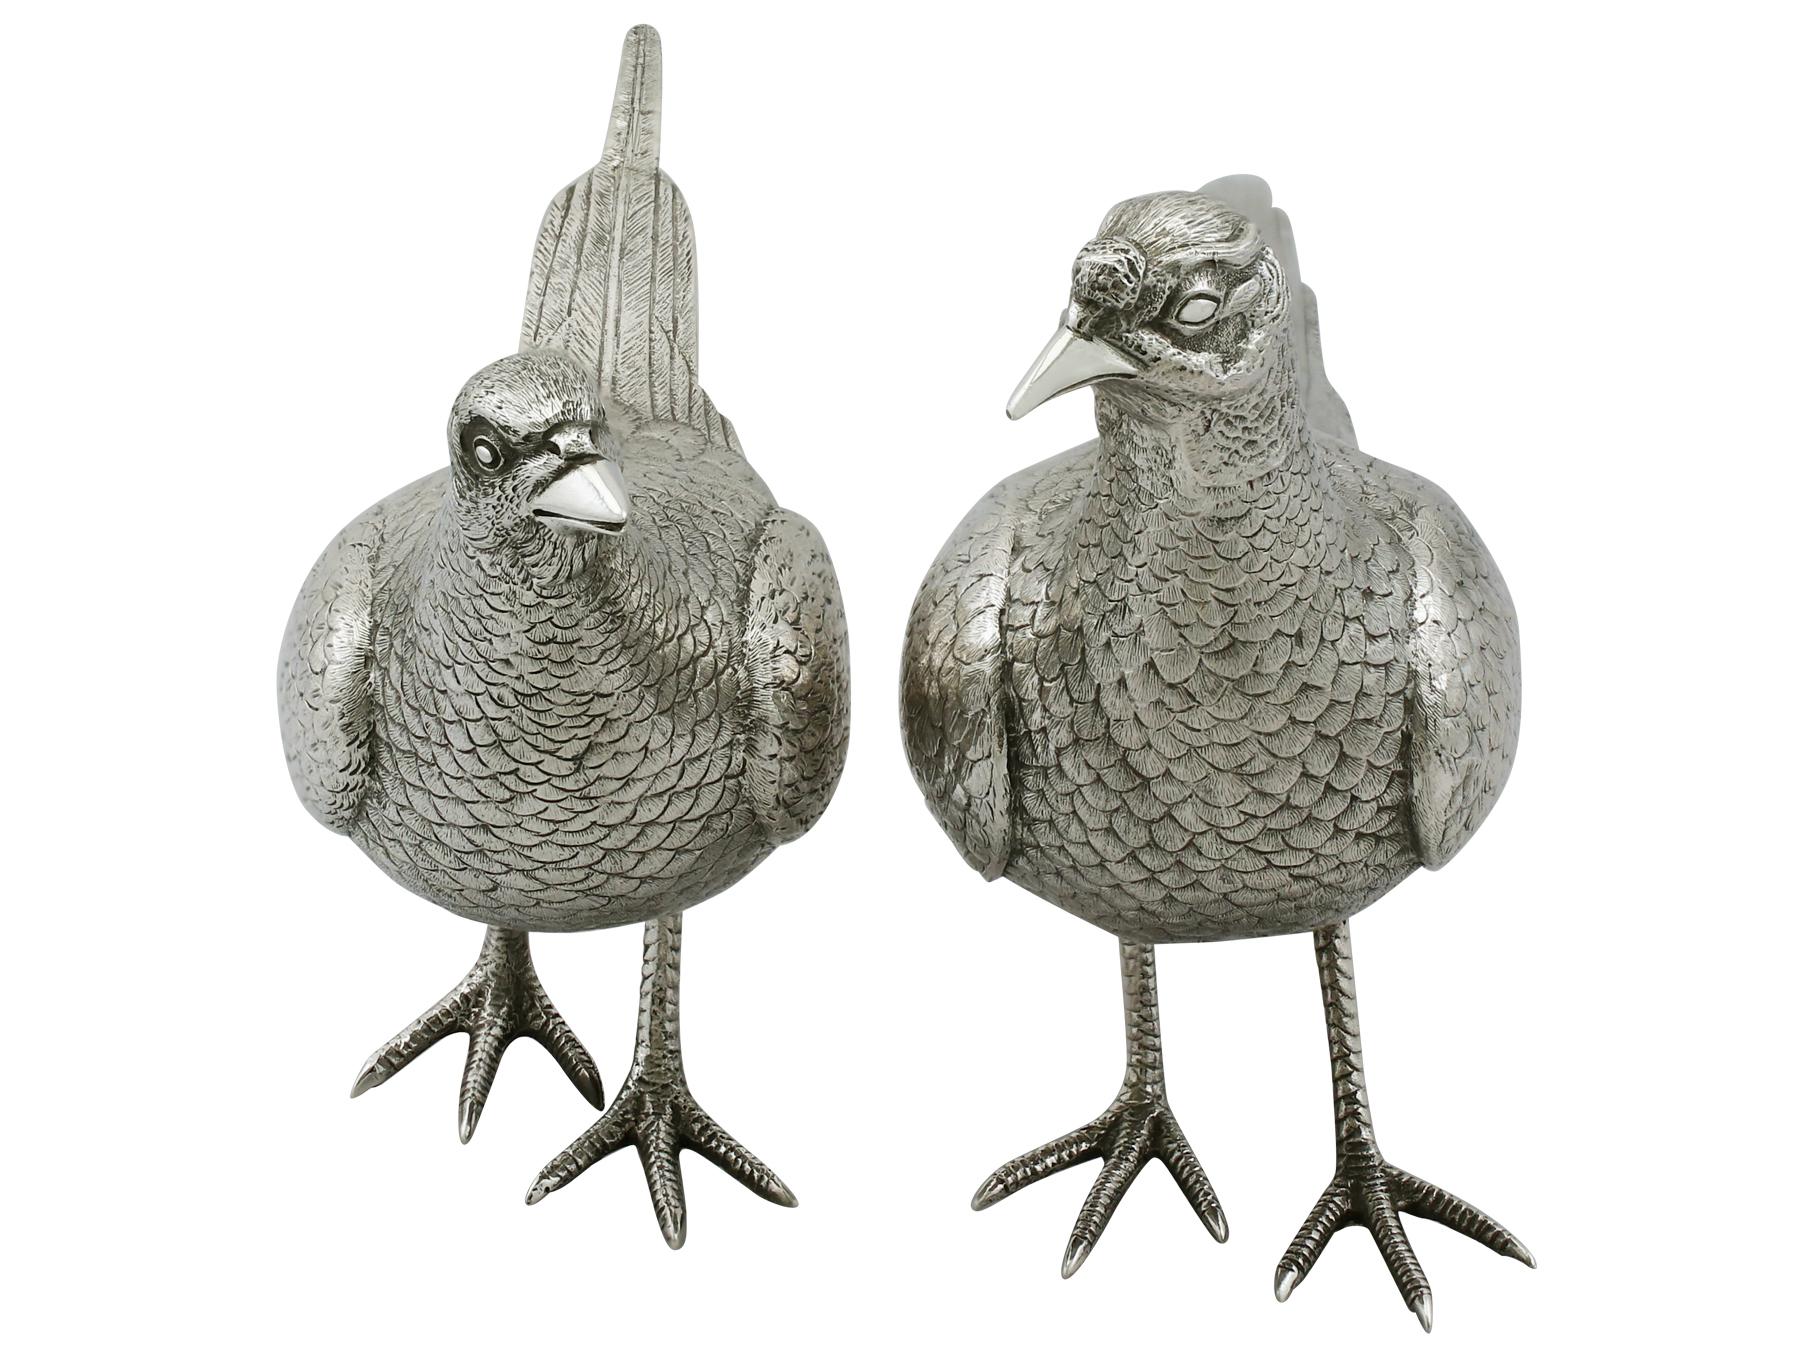 An exceptional, fine and impressive pair of vintage English sterling silver table pheasants; part of our ornamental silverware collection.

These exceptional vintage cast sterling silver table ornaments have been realistically modelled in the form